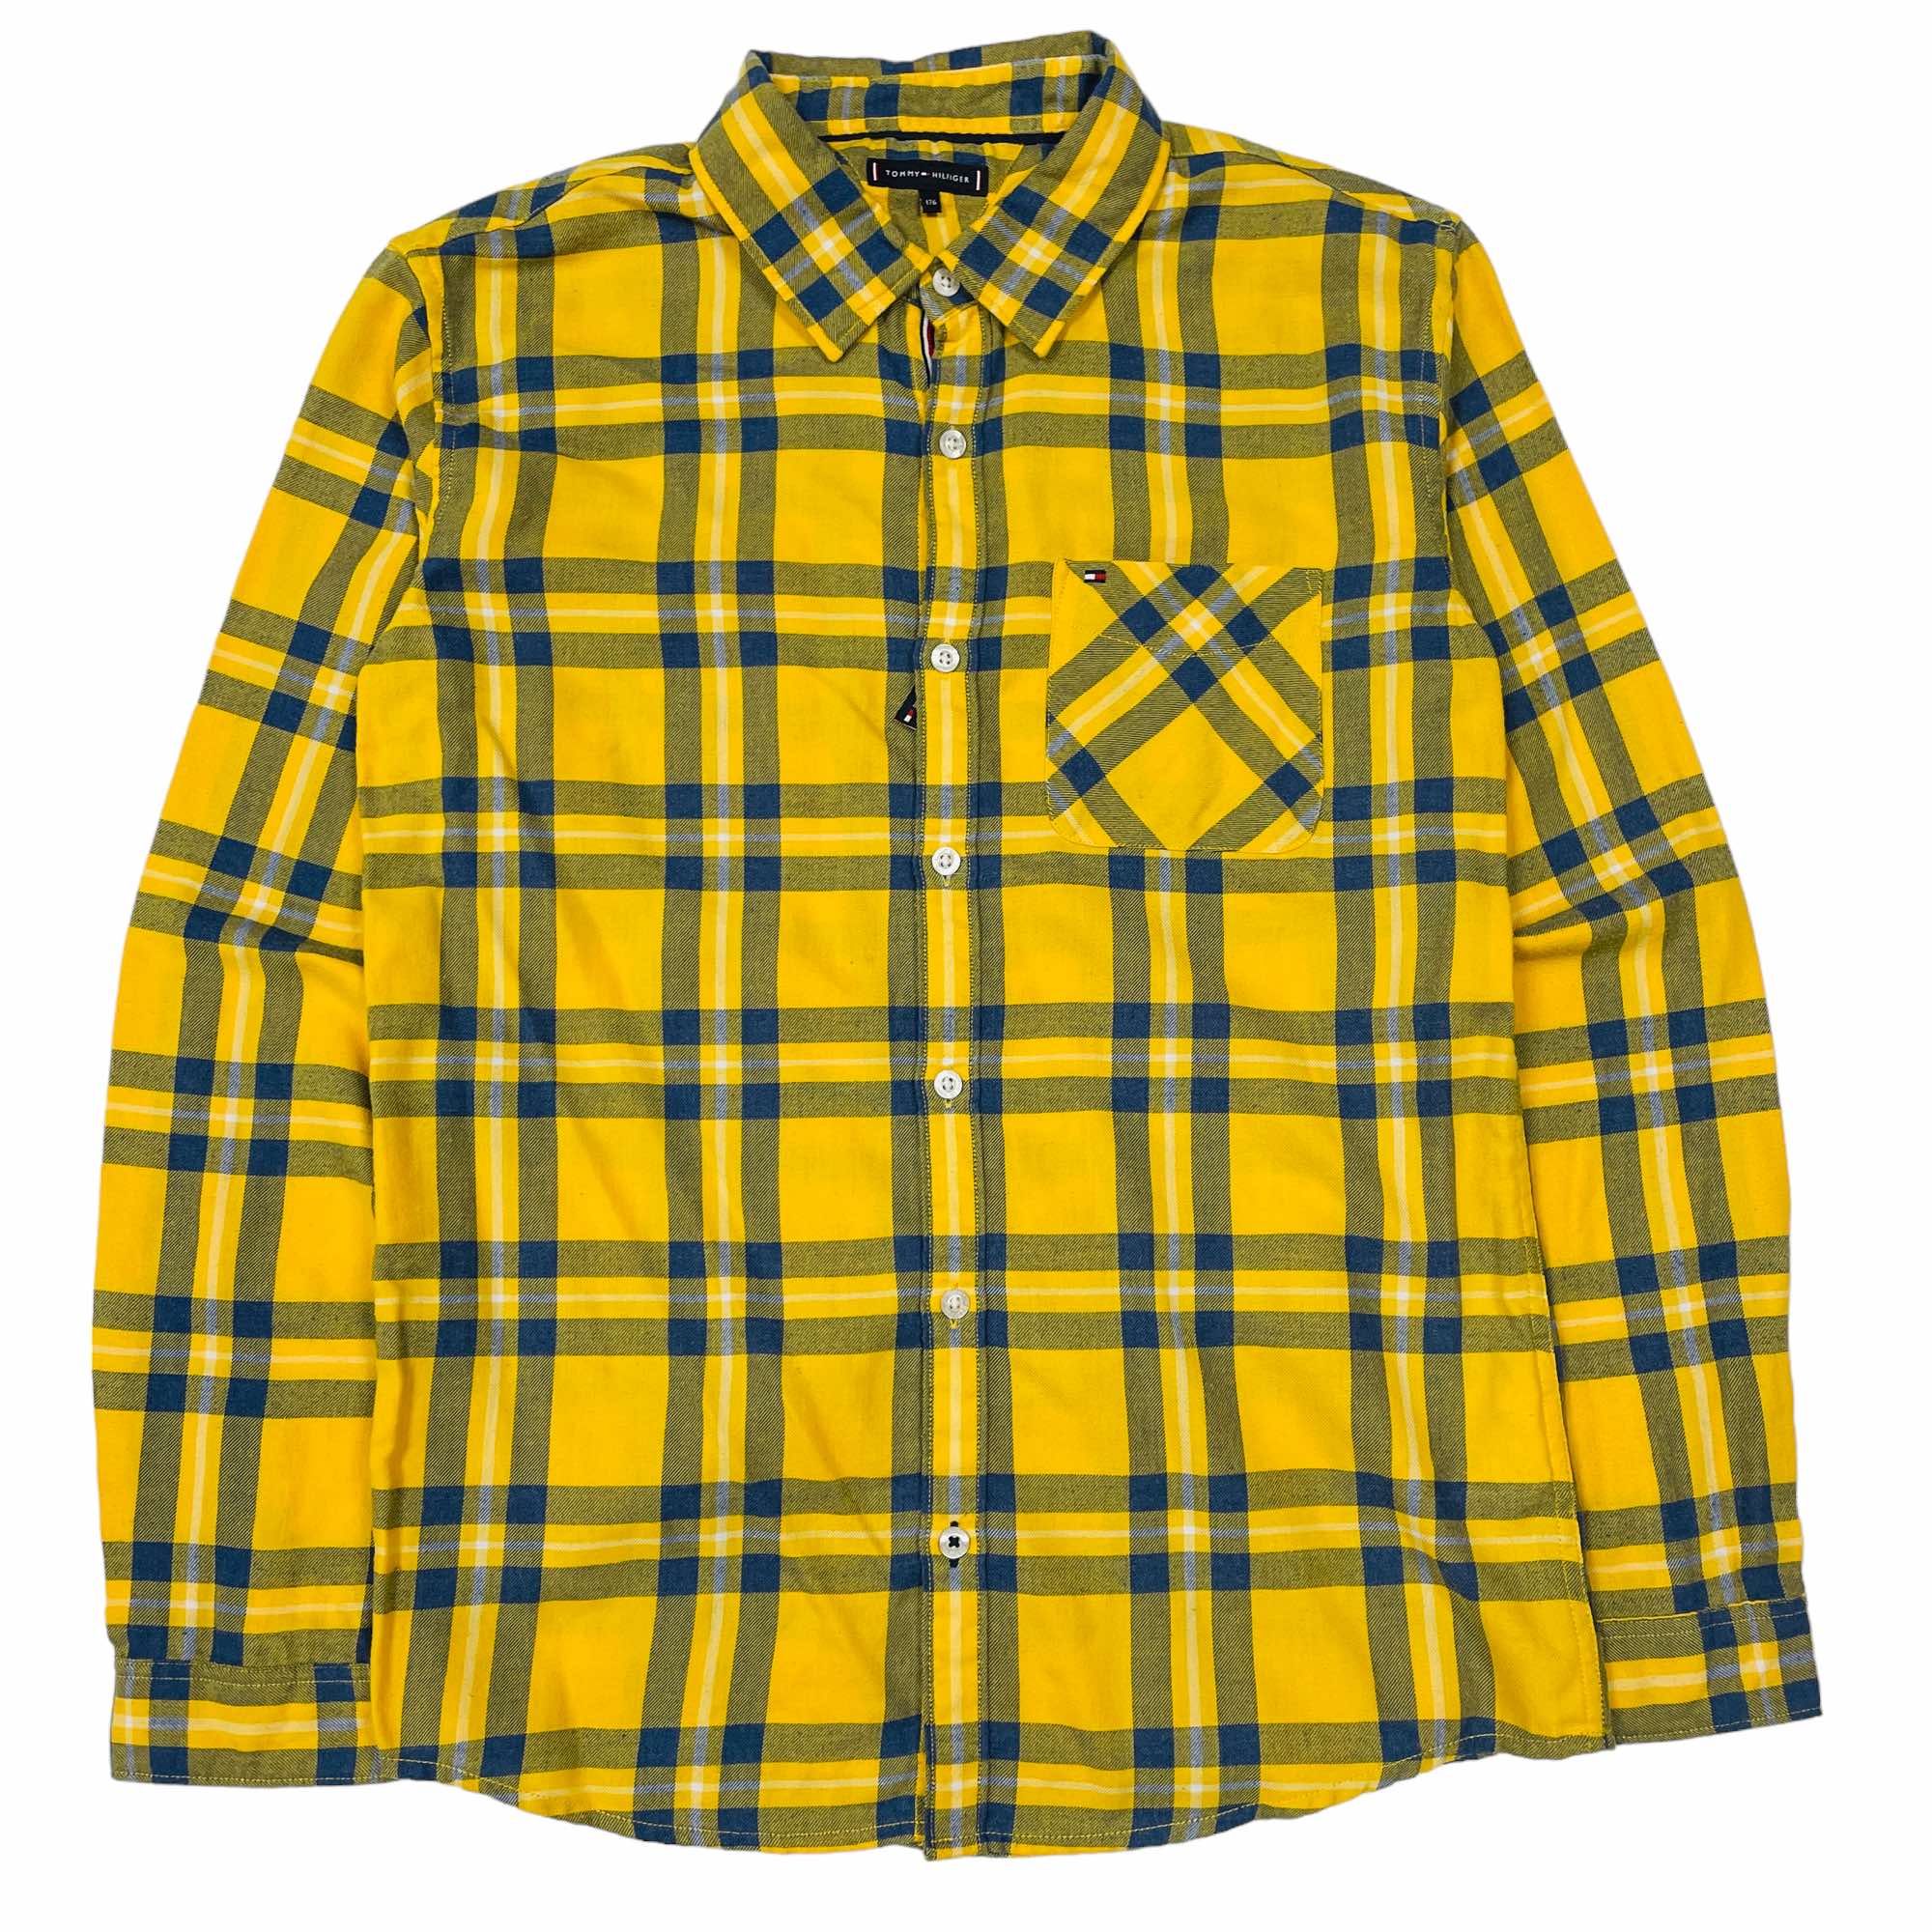 Tommy Hilfiger Chequered Shirt - Small